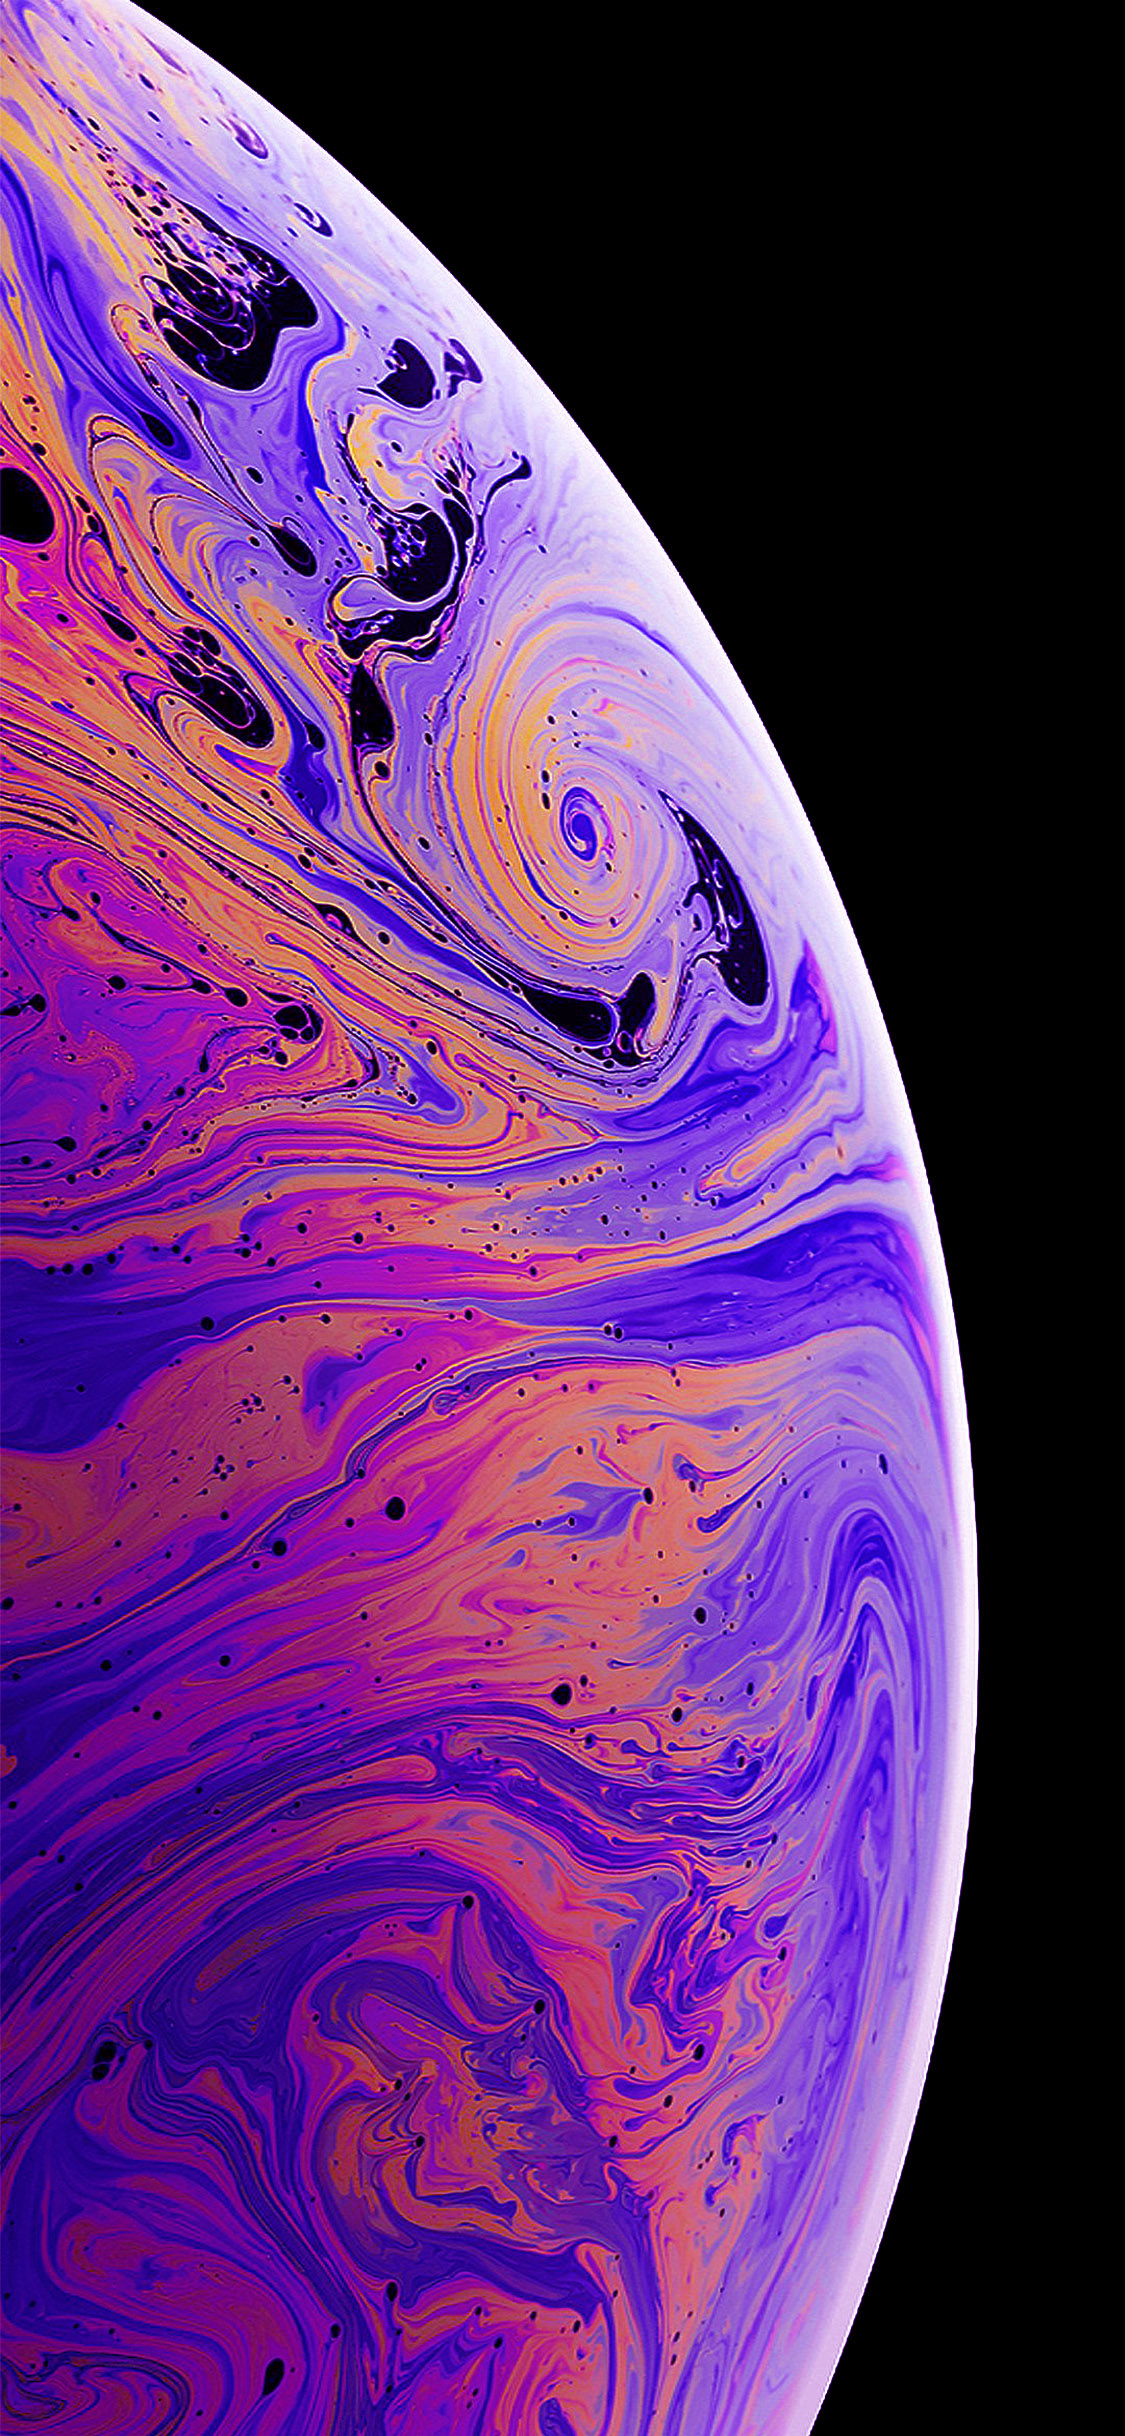 iPhone XS Stock Edited Wallpapers Mohamedovic 02